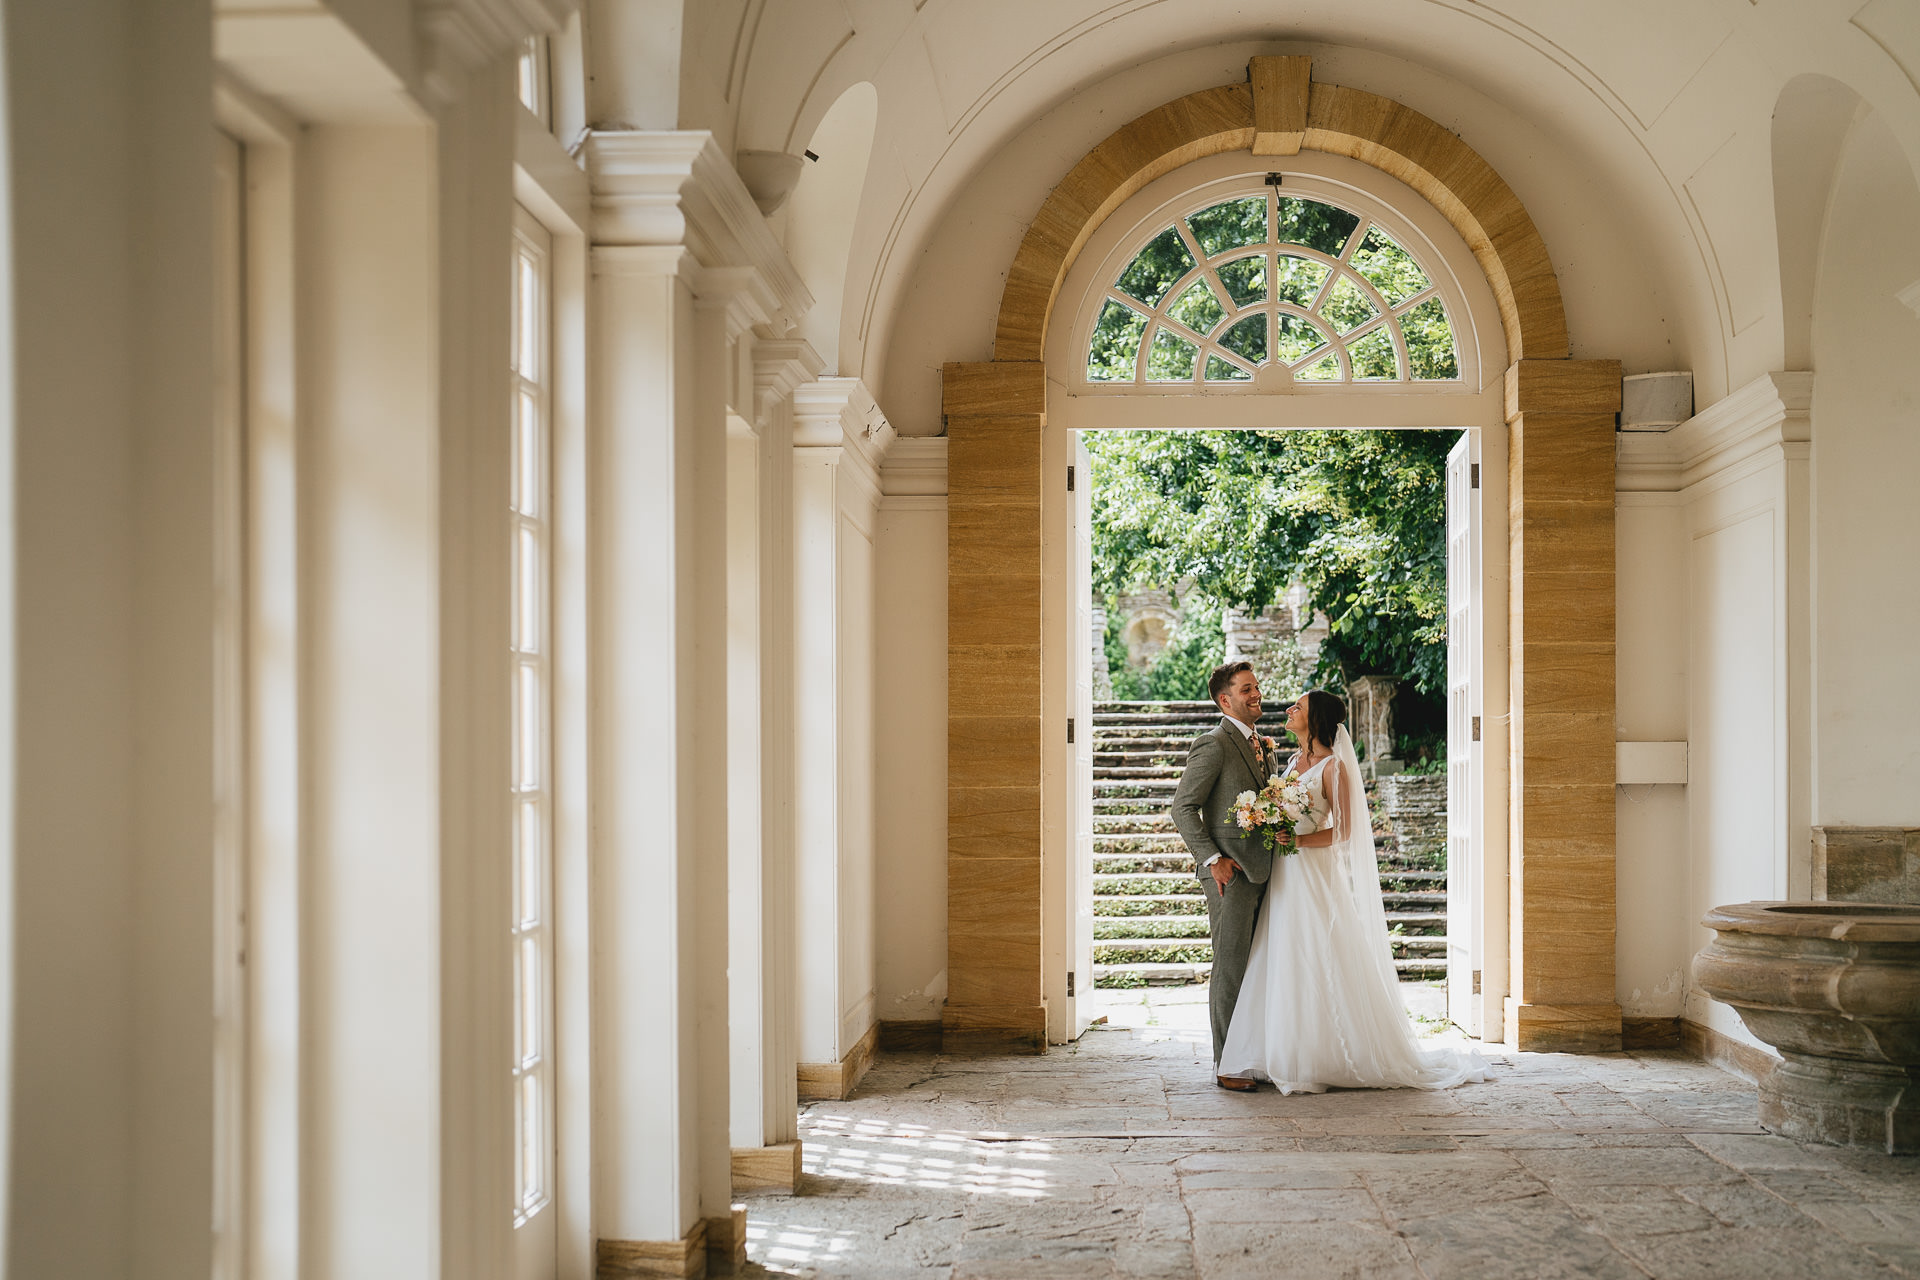 A couple chatting together on their wedding day in the orangery at Hestercombe in Somerset